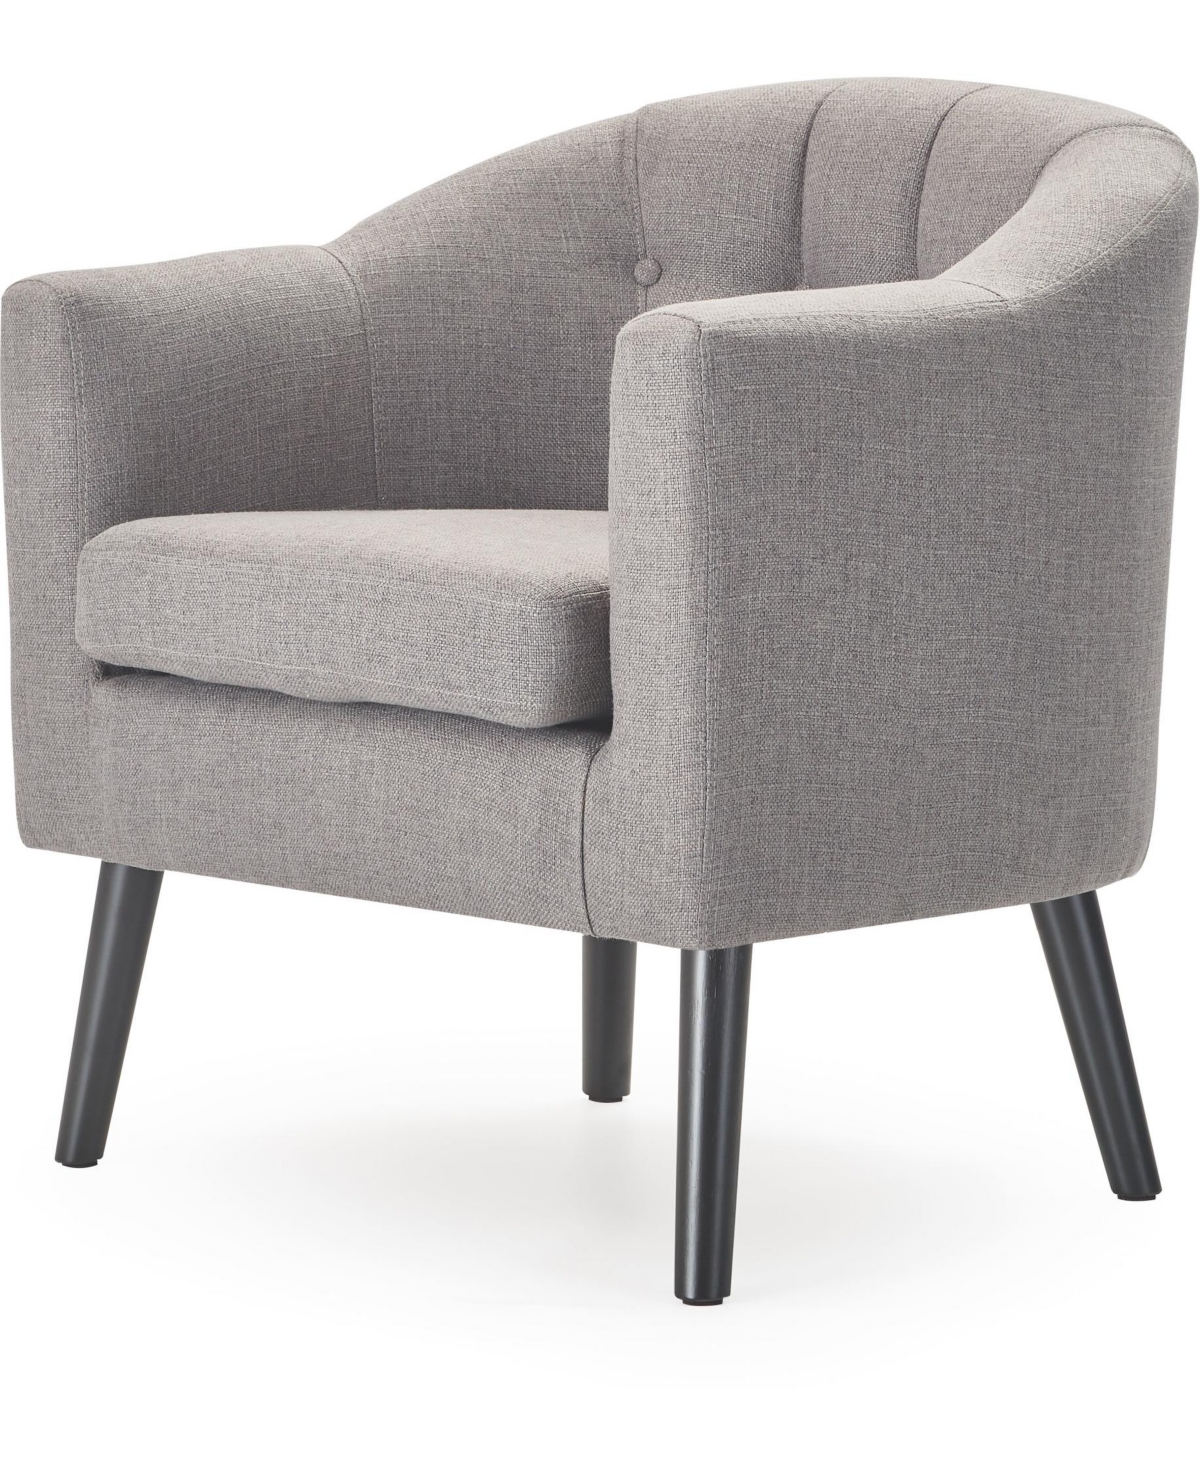 Adore Decor Ivey Tufted Accent Chair